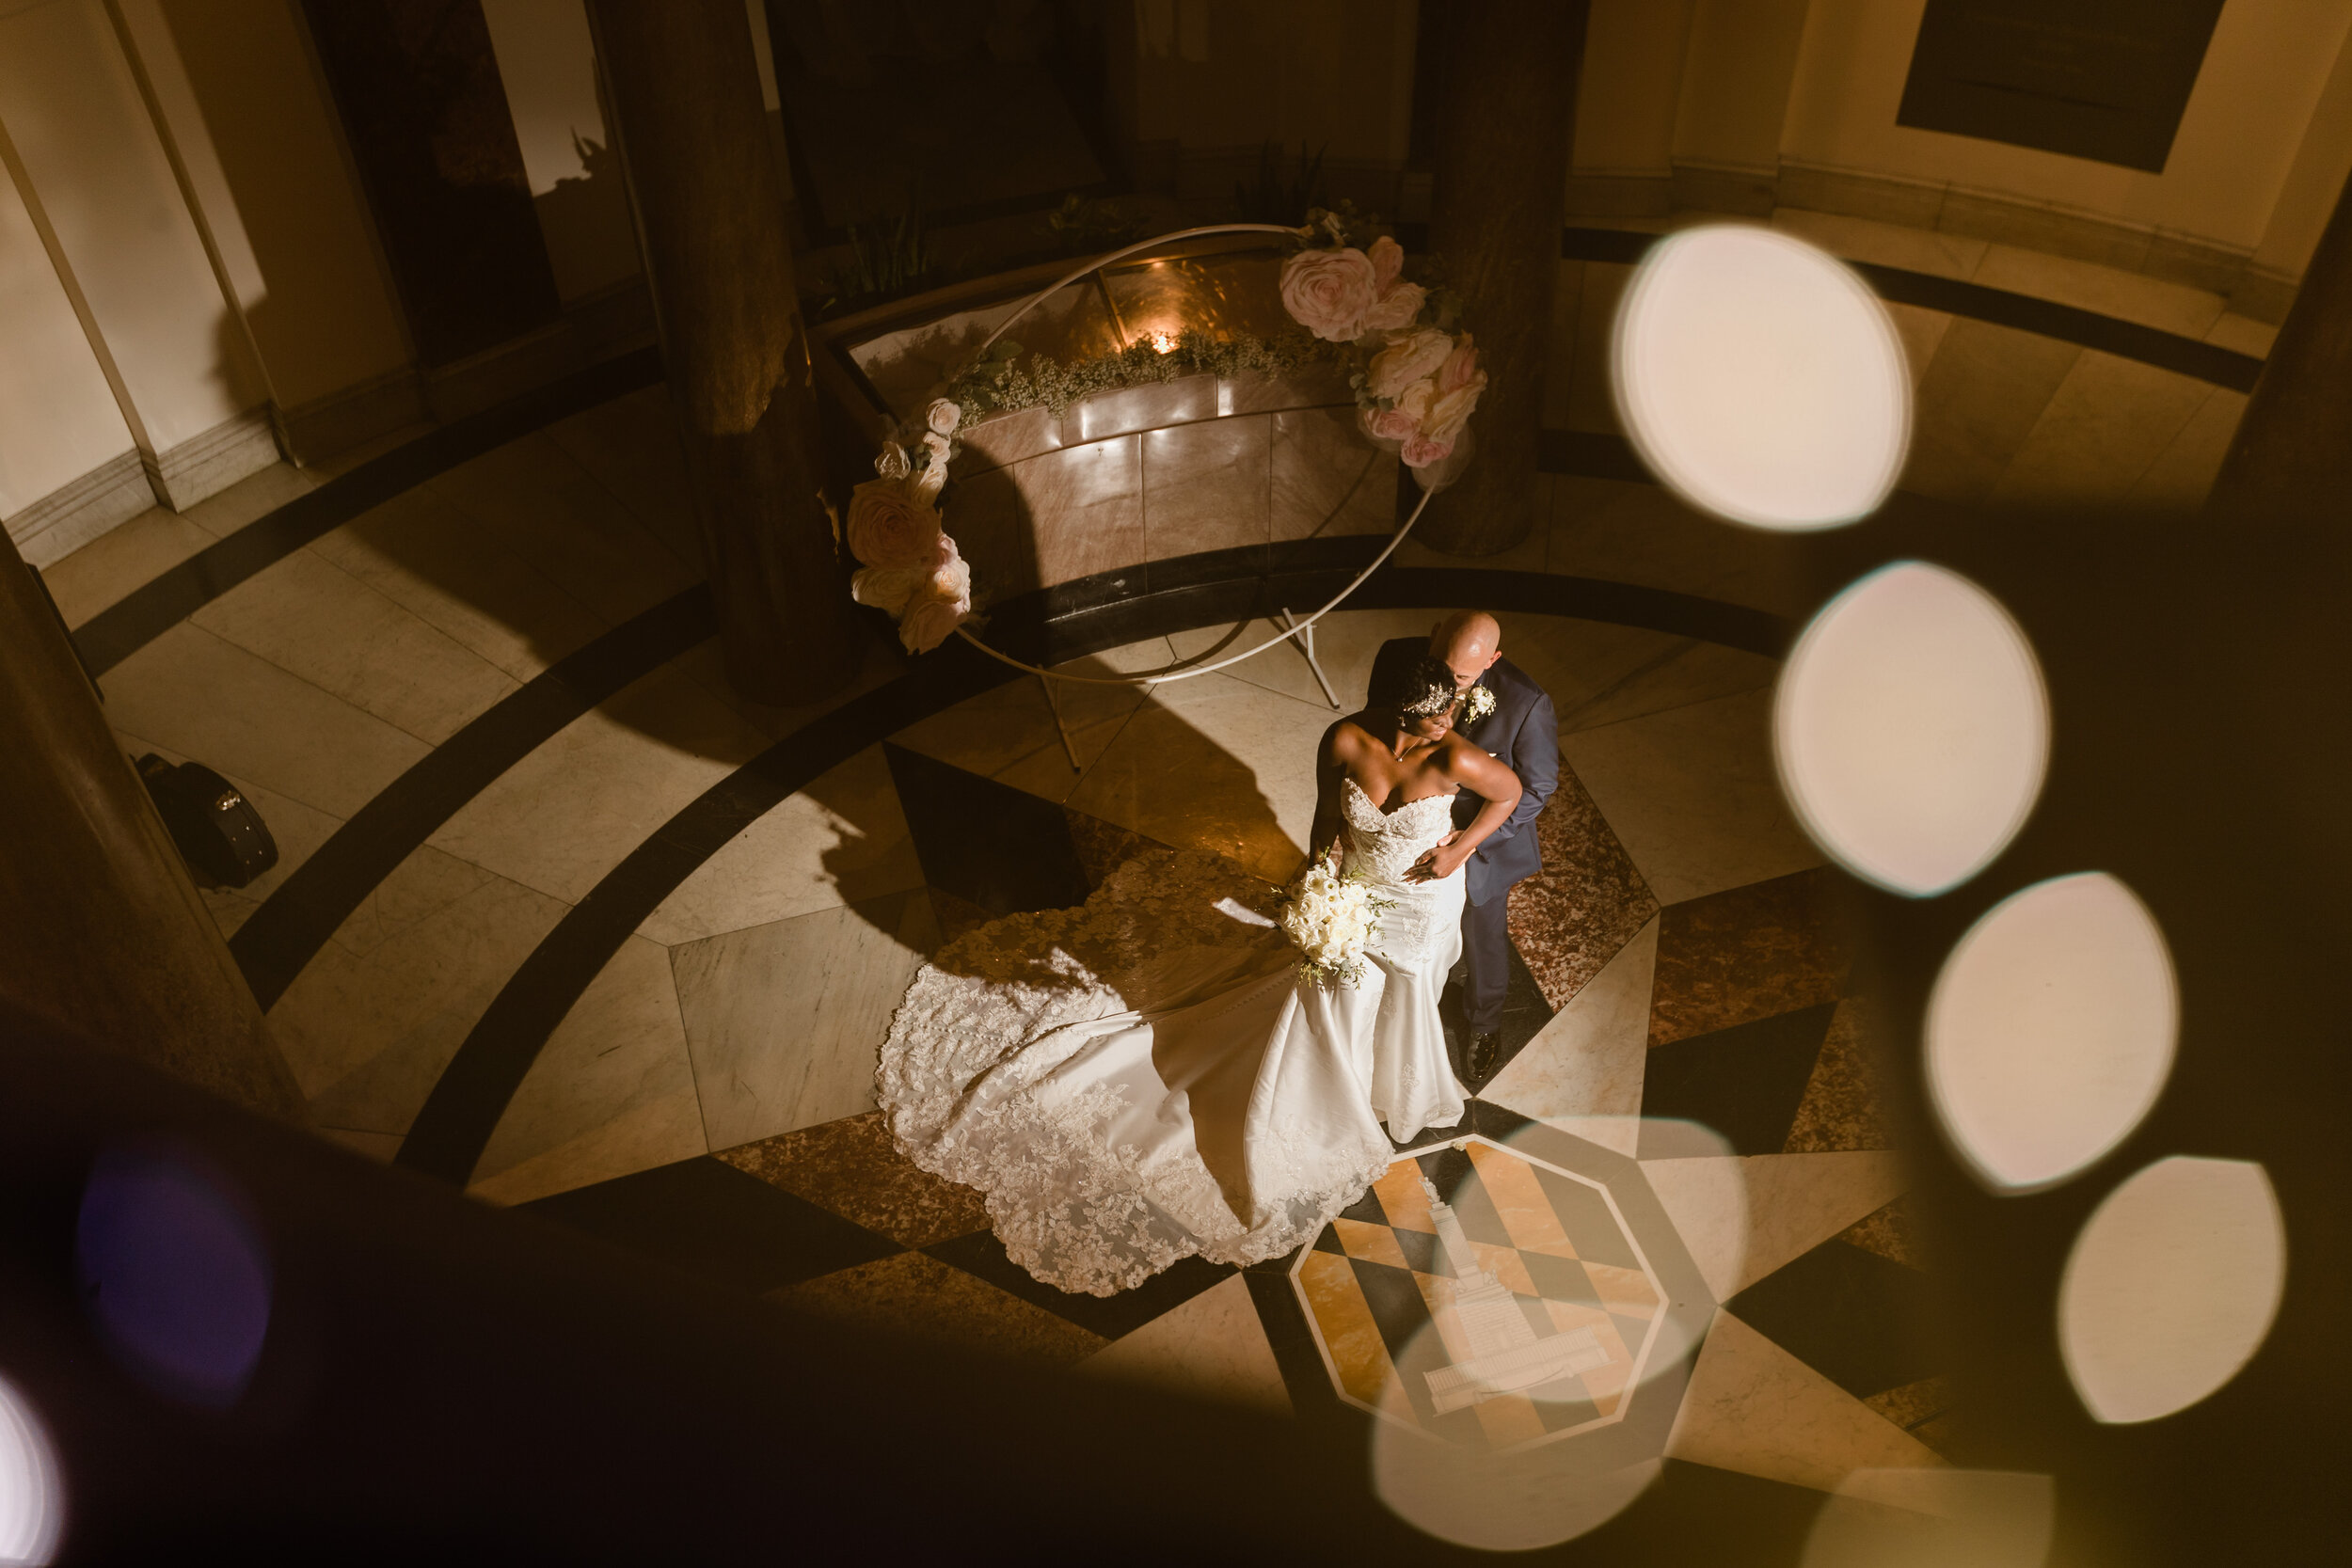 get married in baltimore city hall shot by megapixels media biracial couple wedding photographers maryland-87.jpg